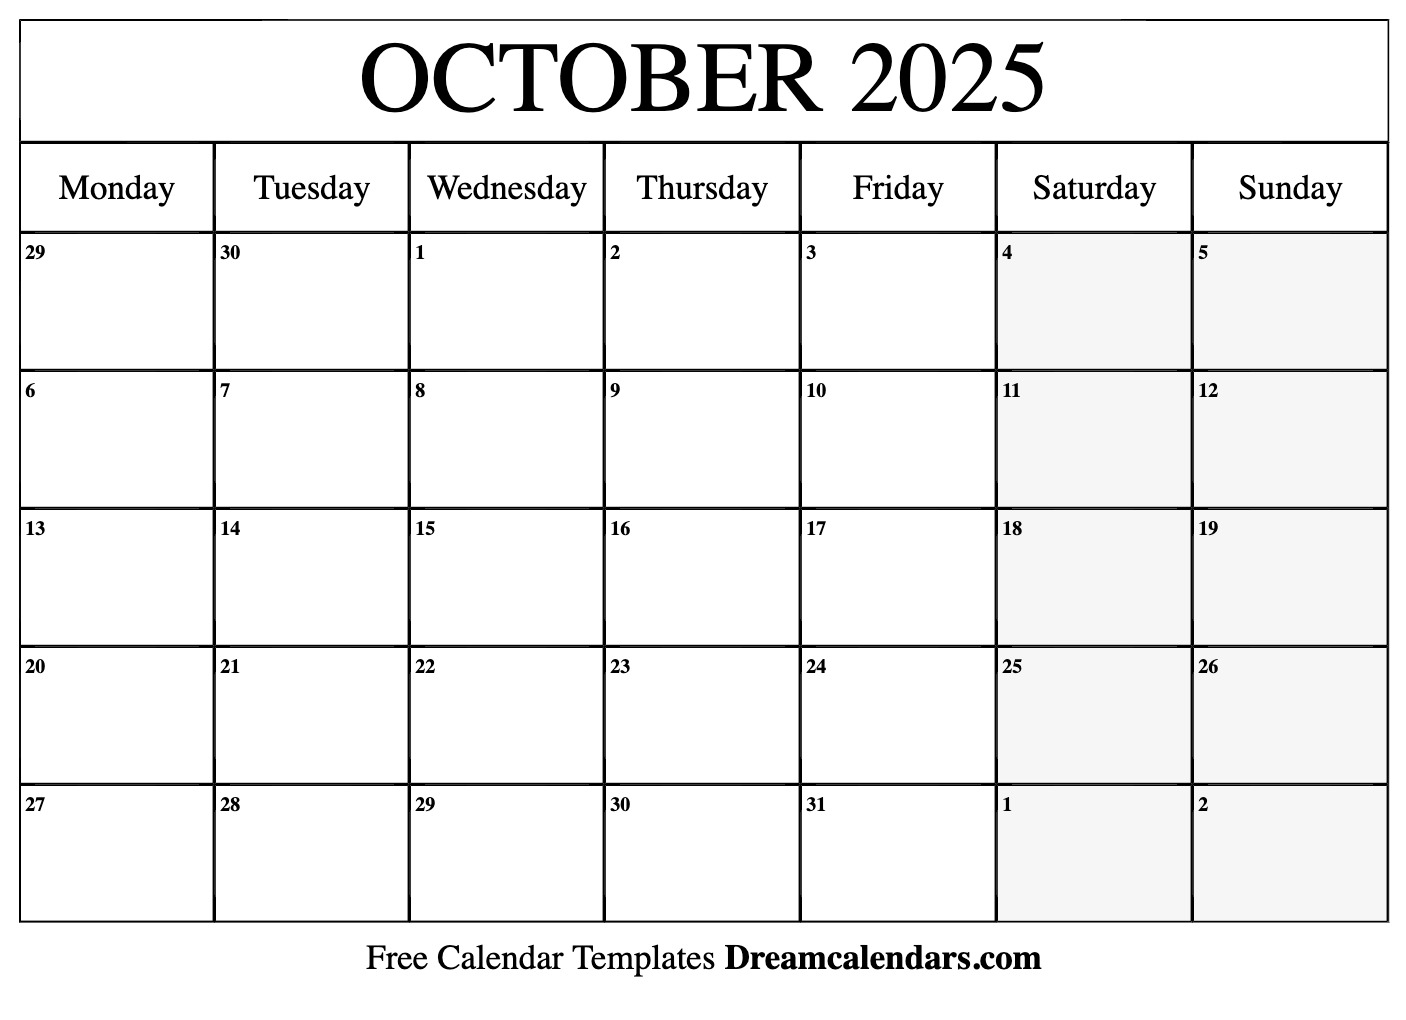 October calendar free blank printable with holidays